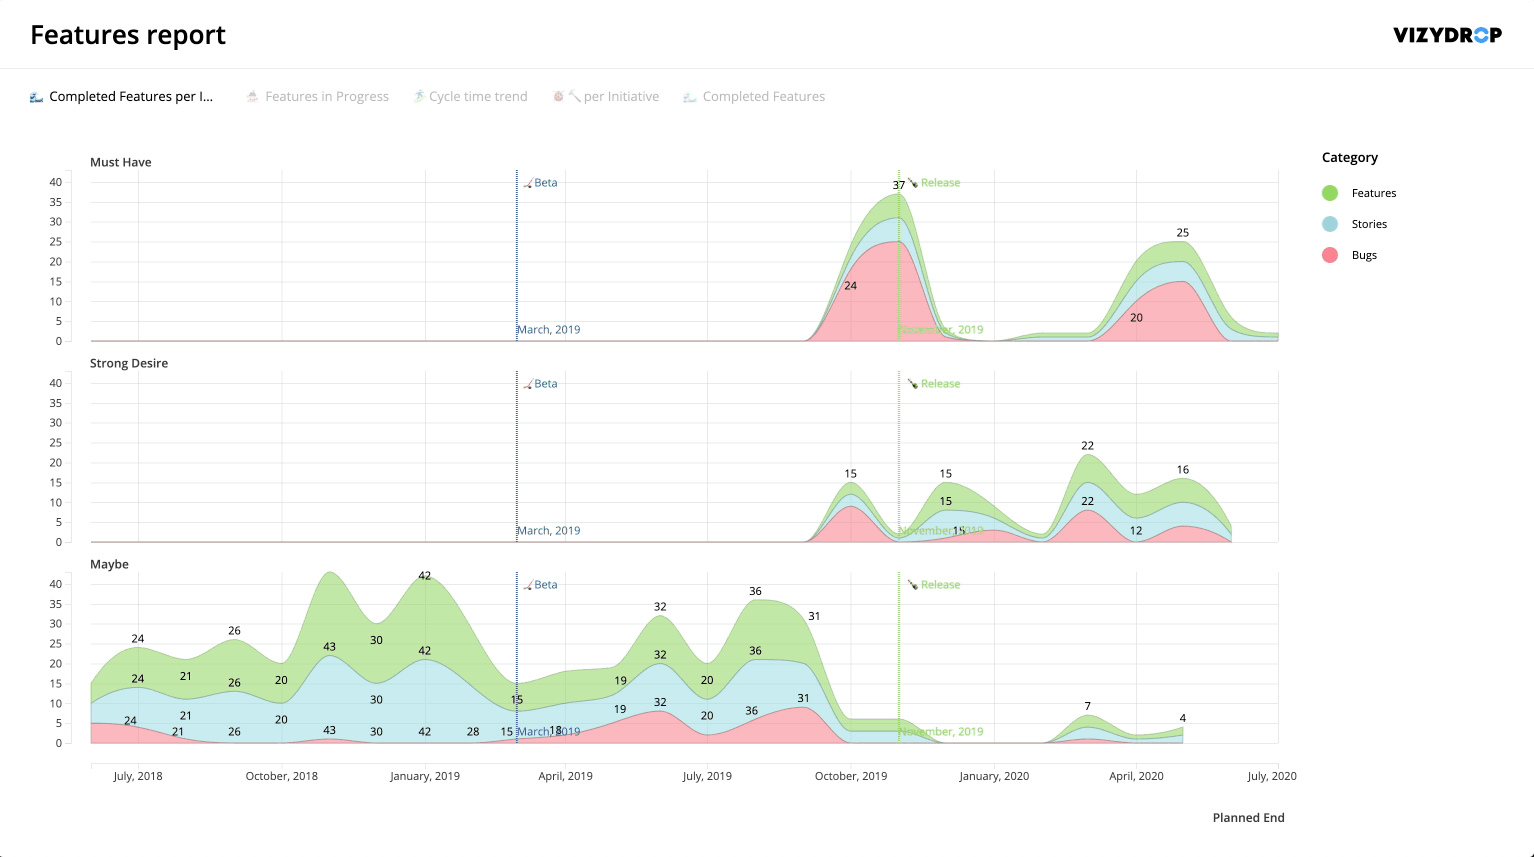 Fibery Chart View. You can create charts and tables. This table shows features progress. Charts are powered by vizydrop.com